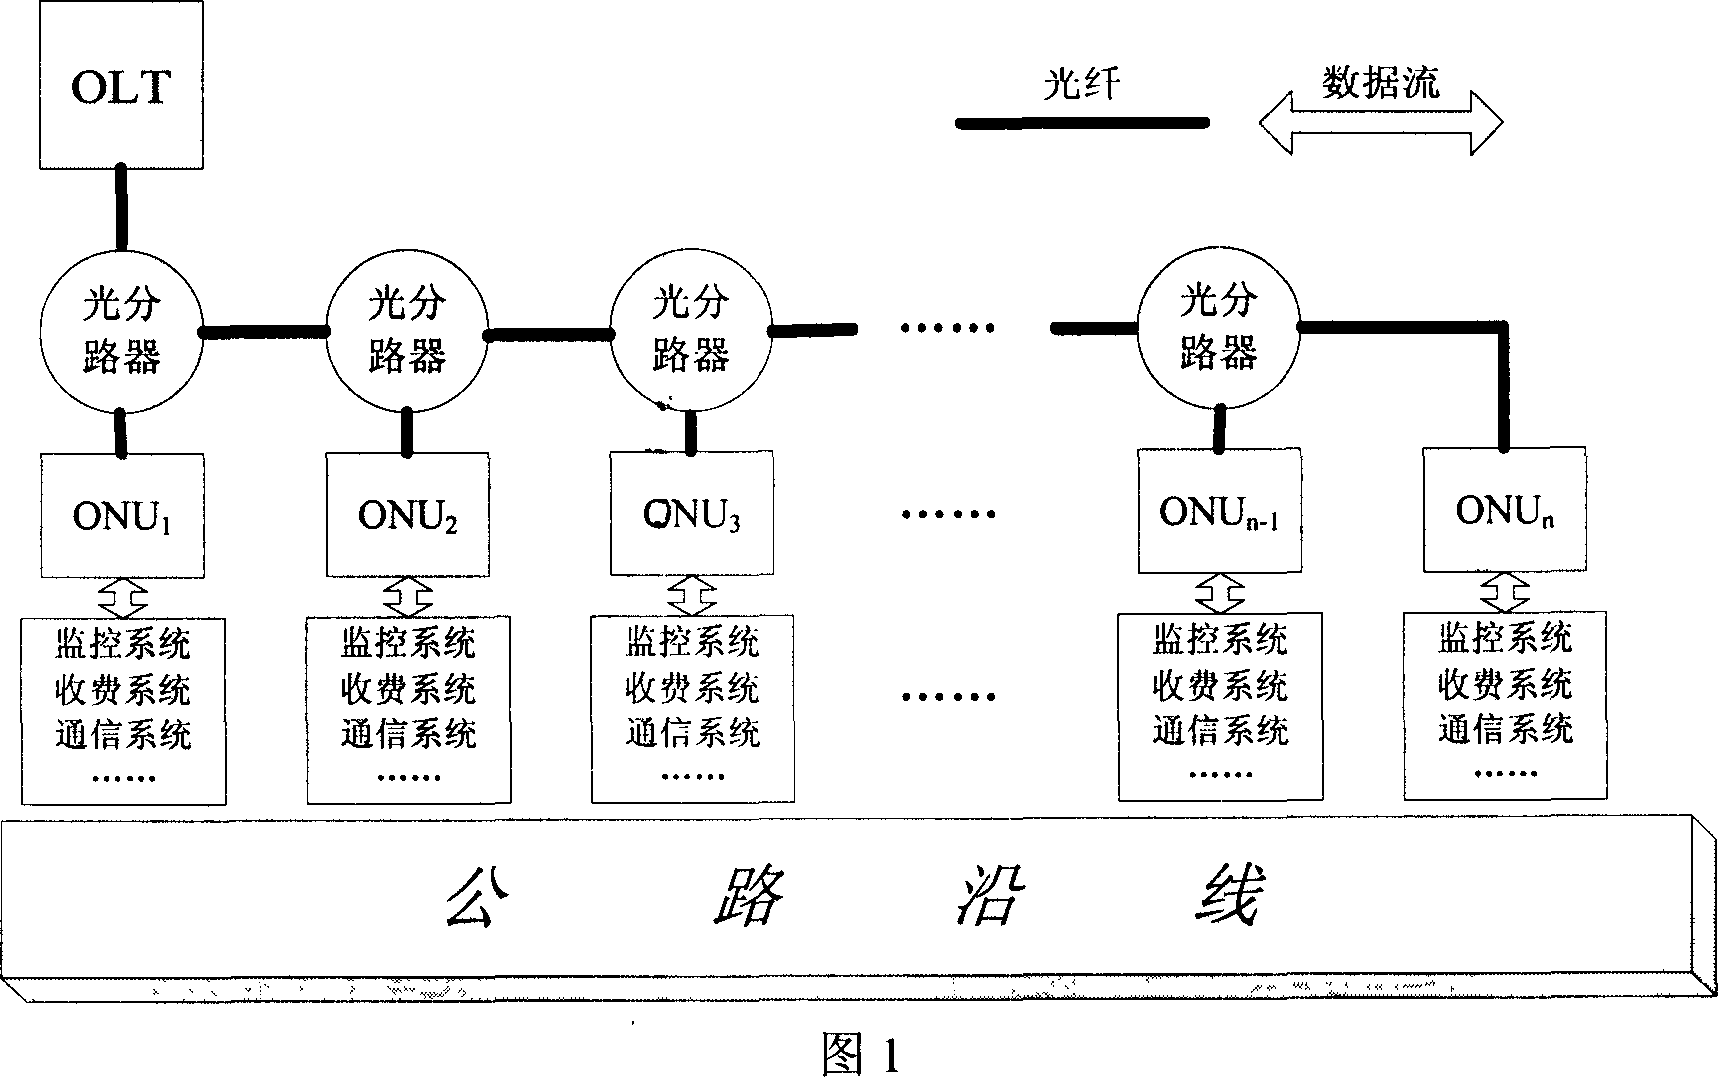 Transmission management system for traffic information by passive optical network of linear topology